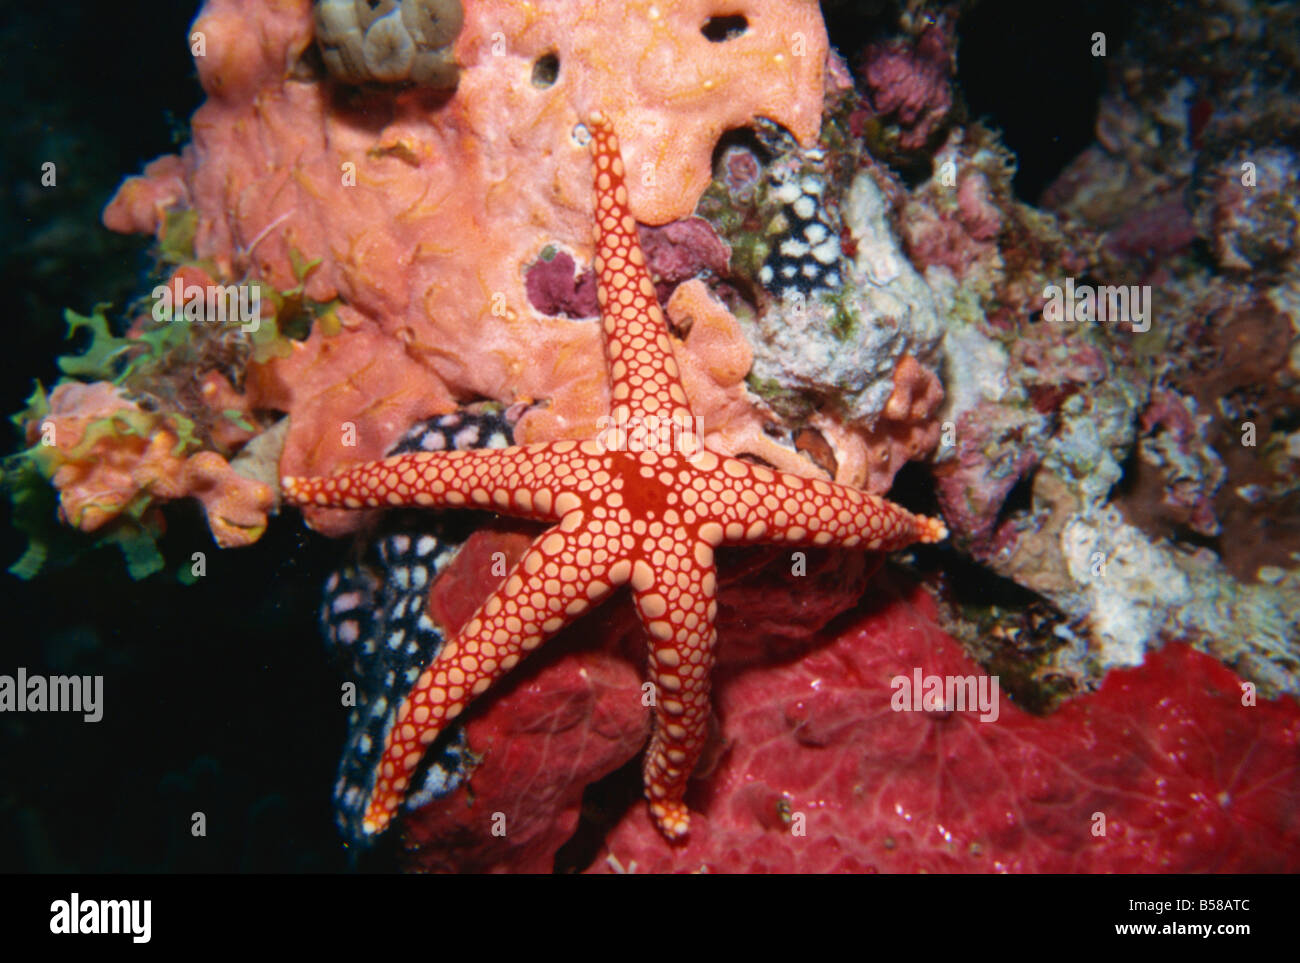 Starfish and soft corals Hurgada Red Sea Egypt North Africa Africa Stock Photo